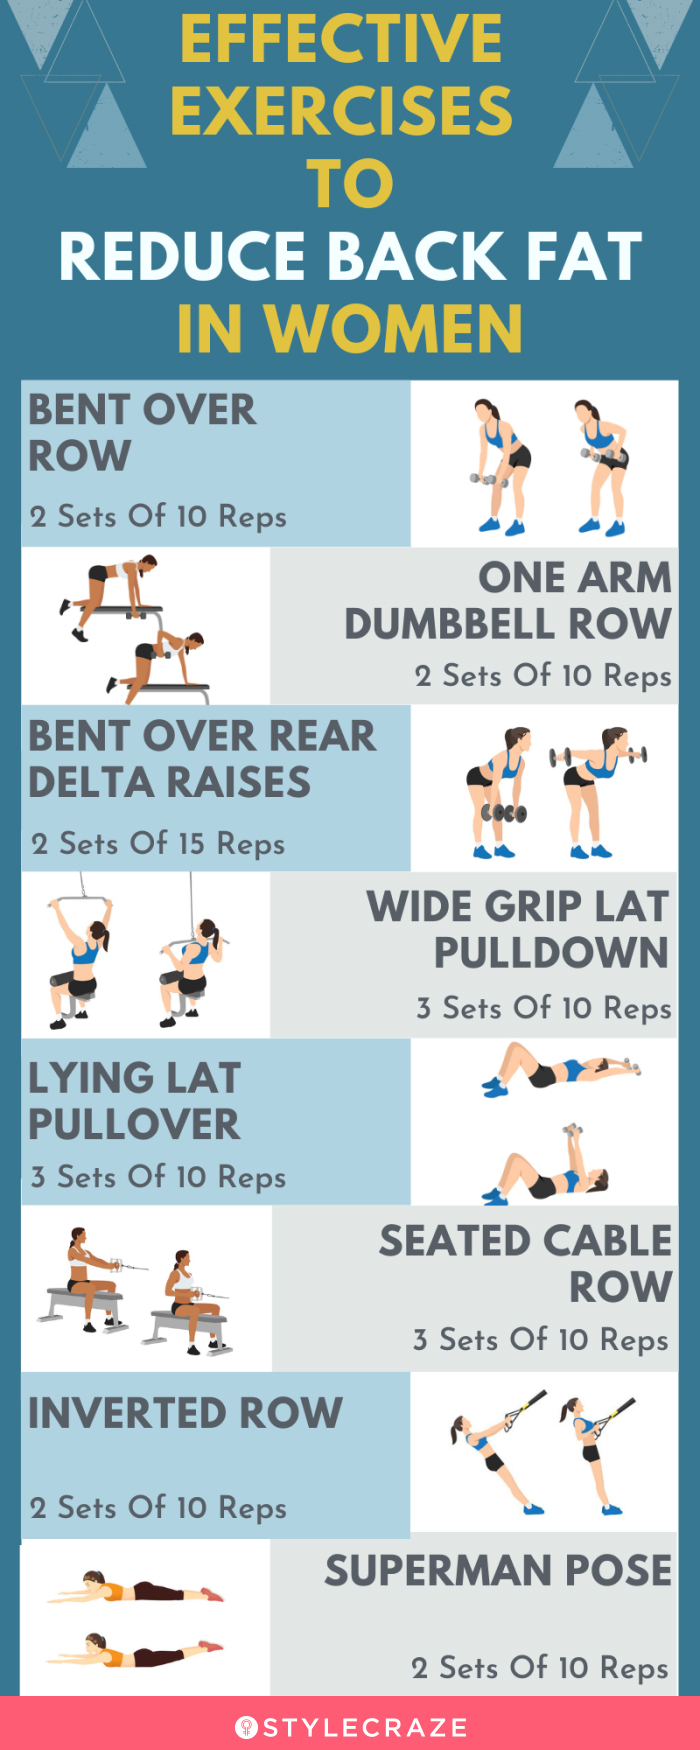 effective exercises to reduce back fat in women (infographic)